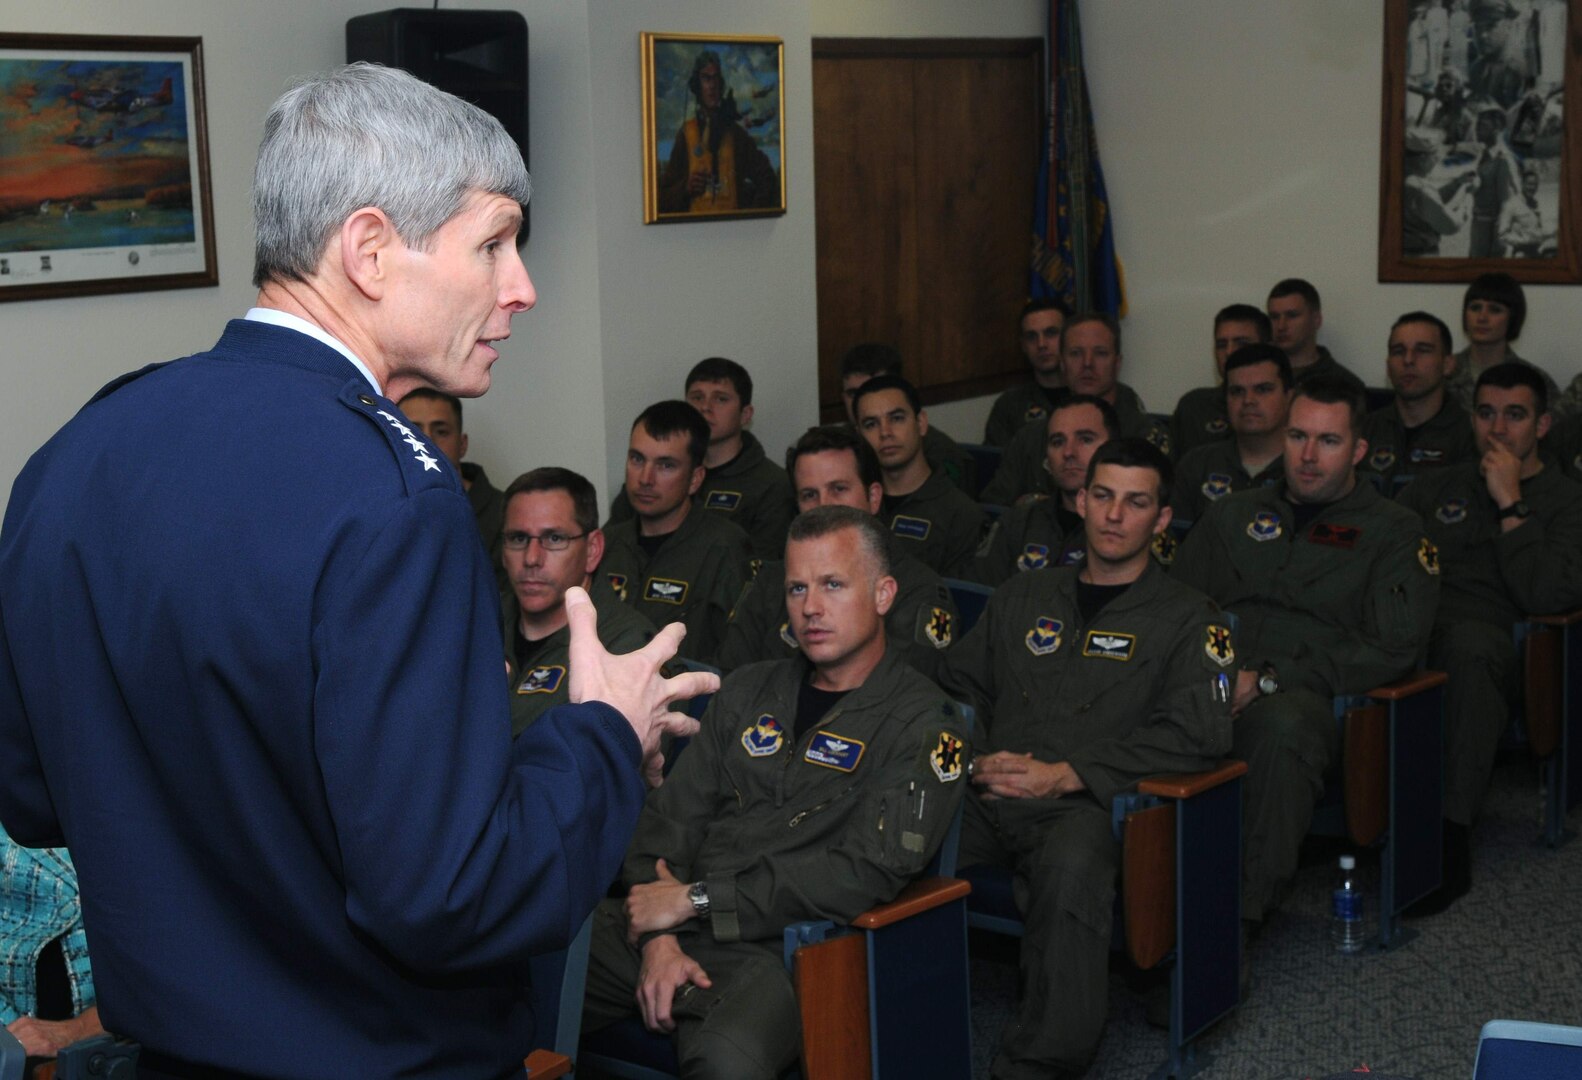 Air Force Chief of Staff Gen. Norton Schwartz addresses student and instructor aviators Feb. 19 in the 99th Flying Training Squadron auditorium at Randolph Air Force Base, Texas. (U.S. Air Force photo/Joel Martinez)